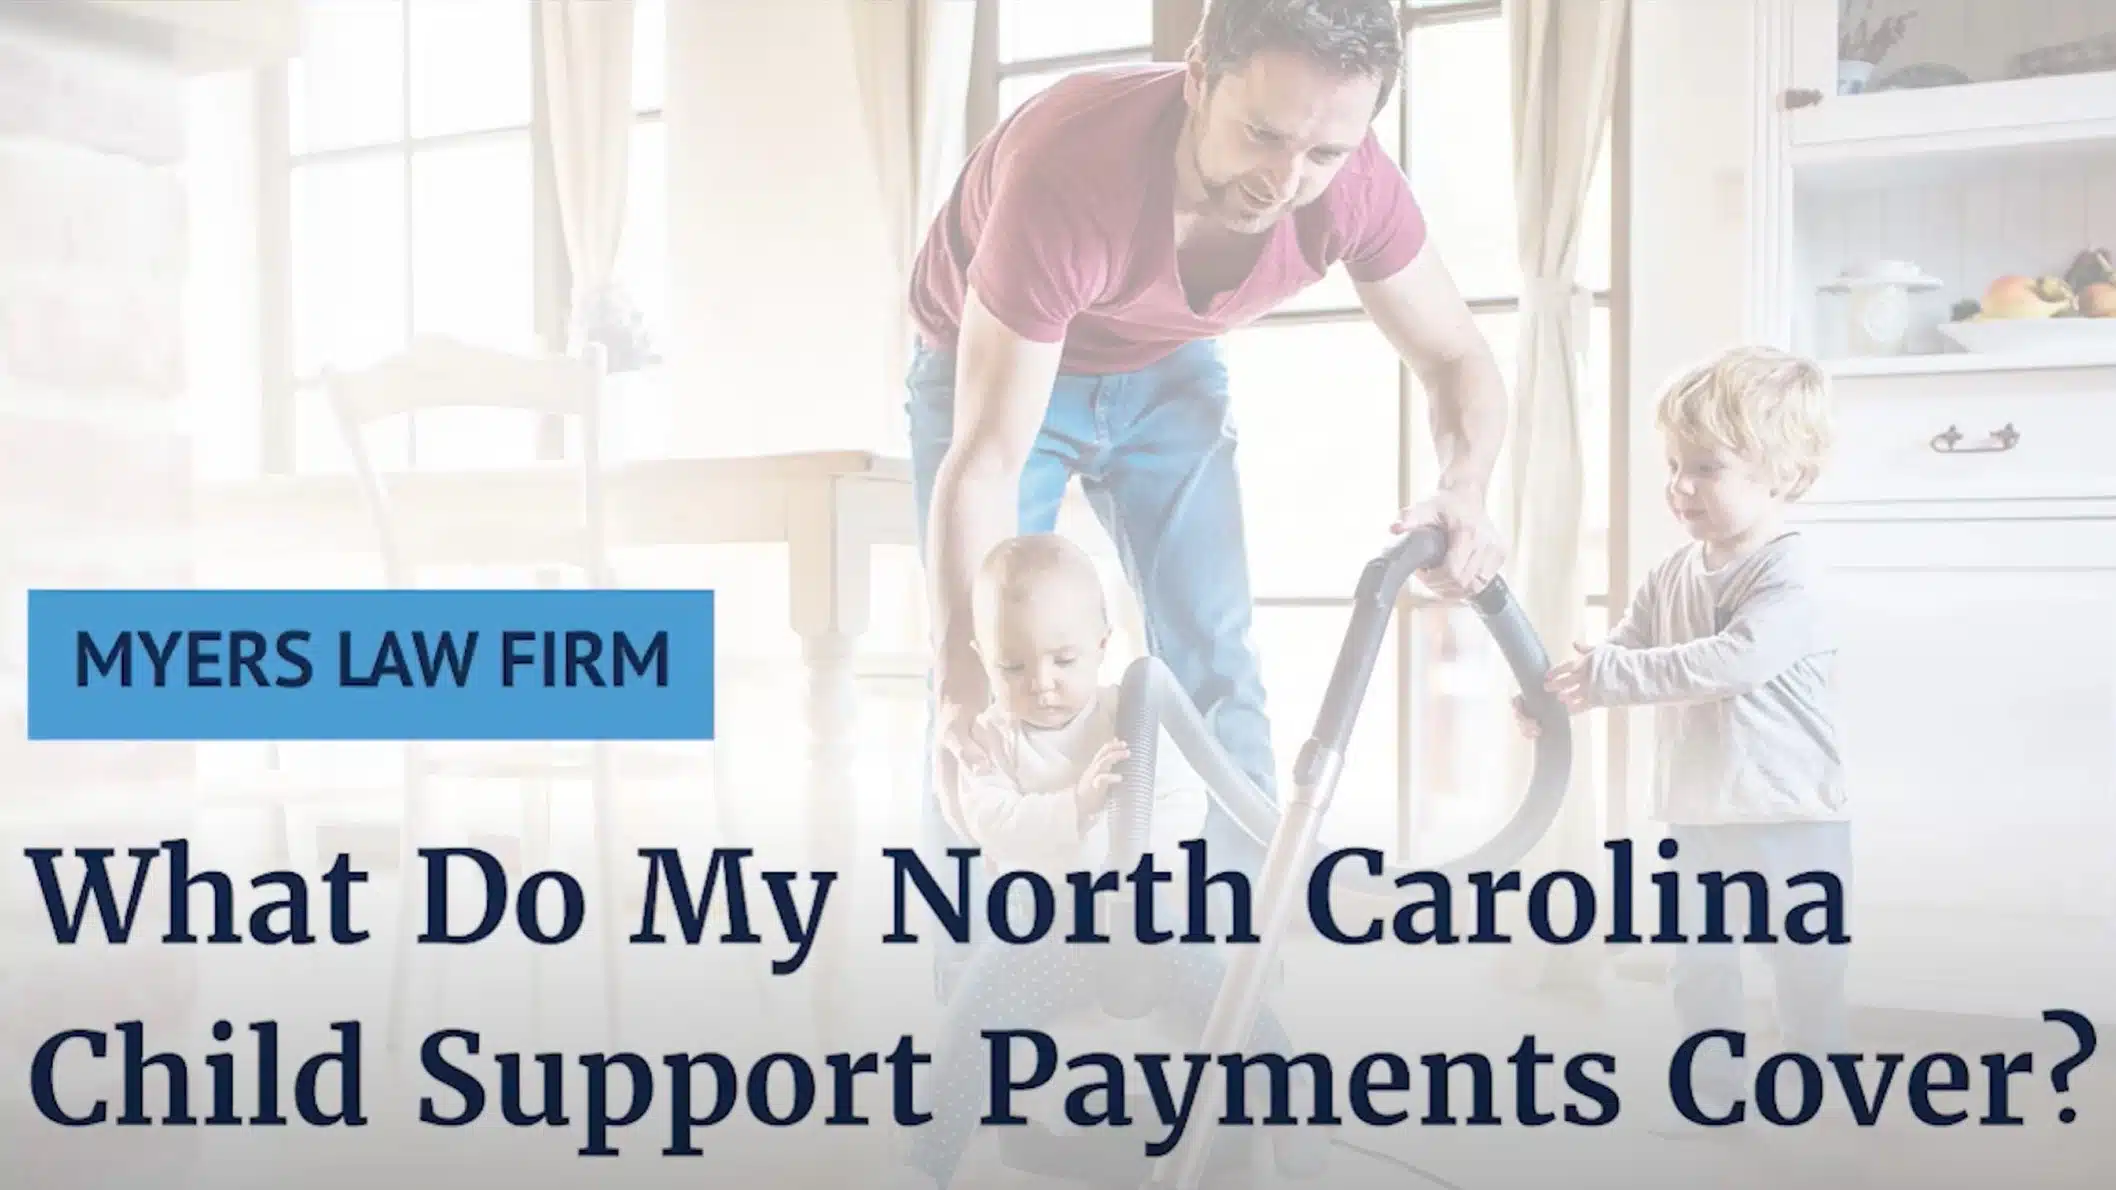 Child Support Payments Video